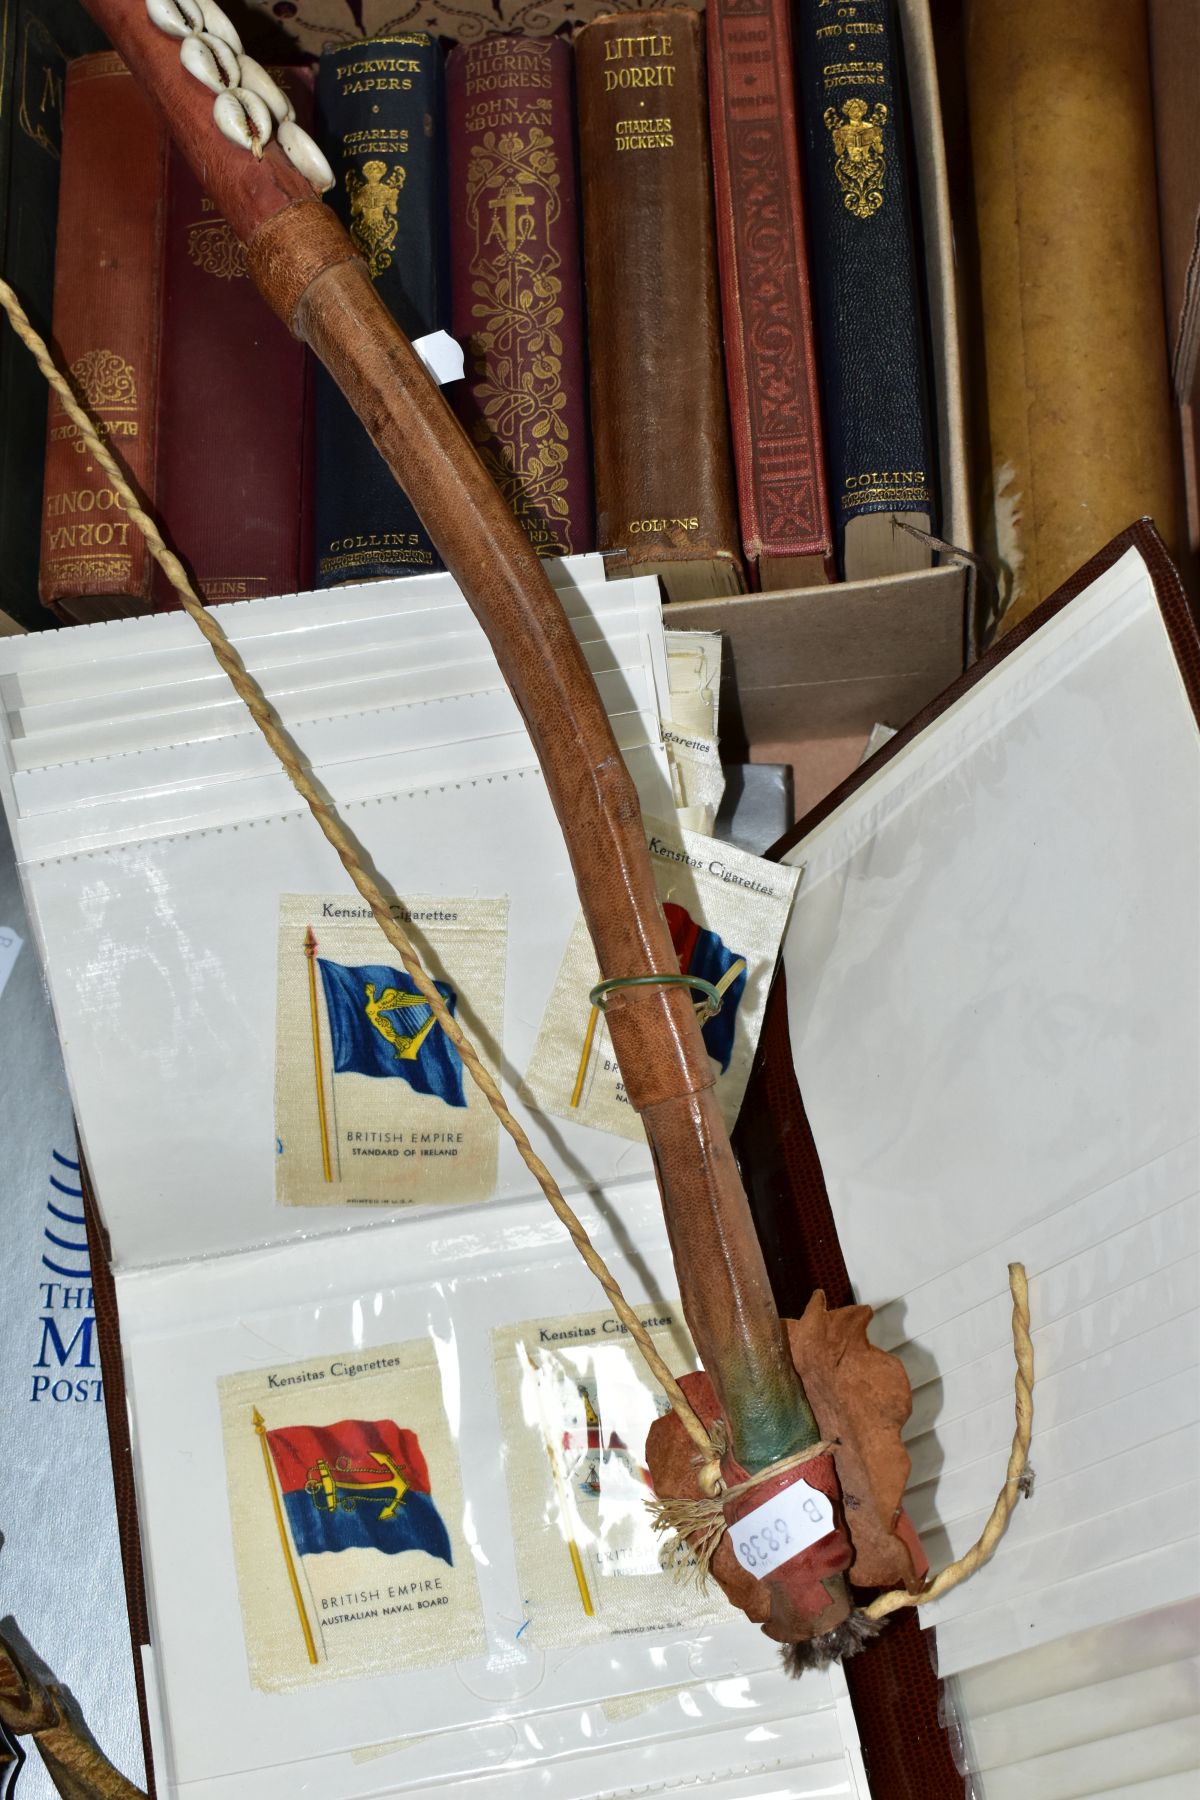 A BOX OF CHARLES DICKENS AND OTHER BOOKS, A TURNED WOODEN TRUNCHEONS, THREE ROLLED ORDER OF - Image 4 of 9